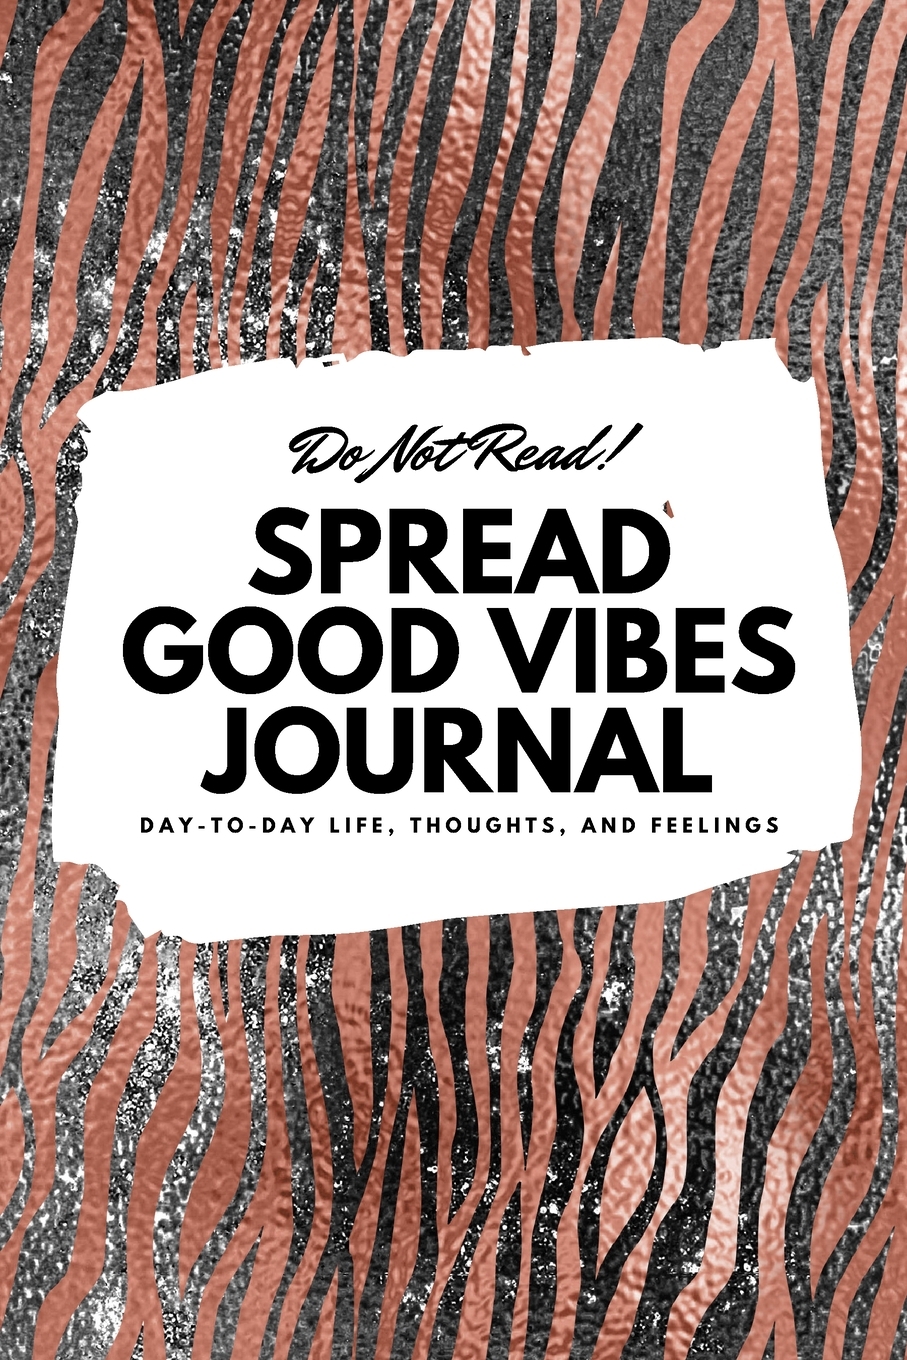 6x9 Blank Journal: Do Not Read! Spread Good Vibes Journal - Small Blank Journal - 6x9 Blank Journal (Softcover Journal / Notebook / Sketchbook / Diary) (Series #44) (Paperback) - image 1 of 1